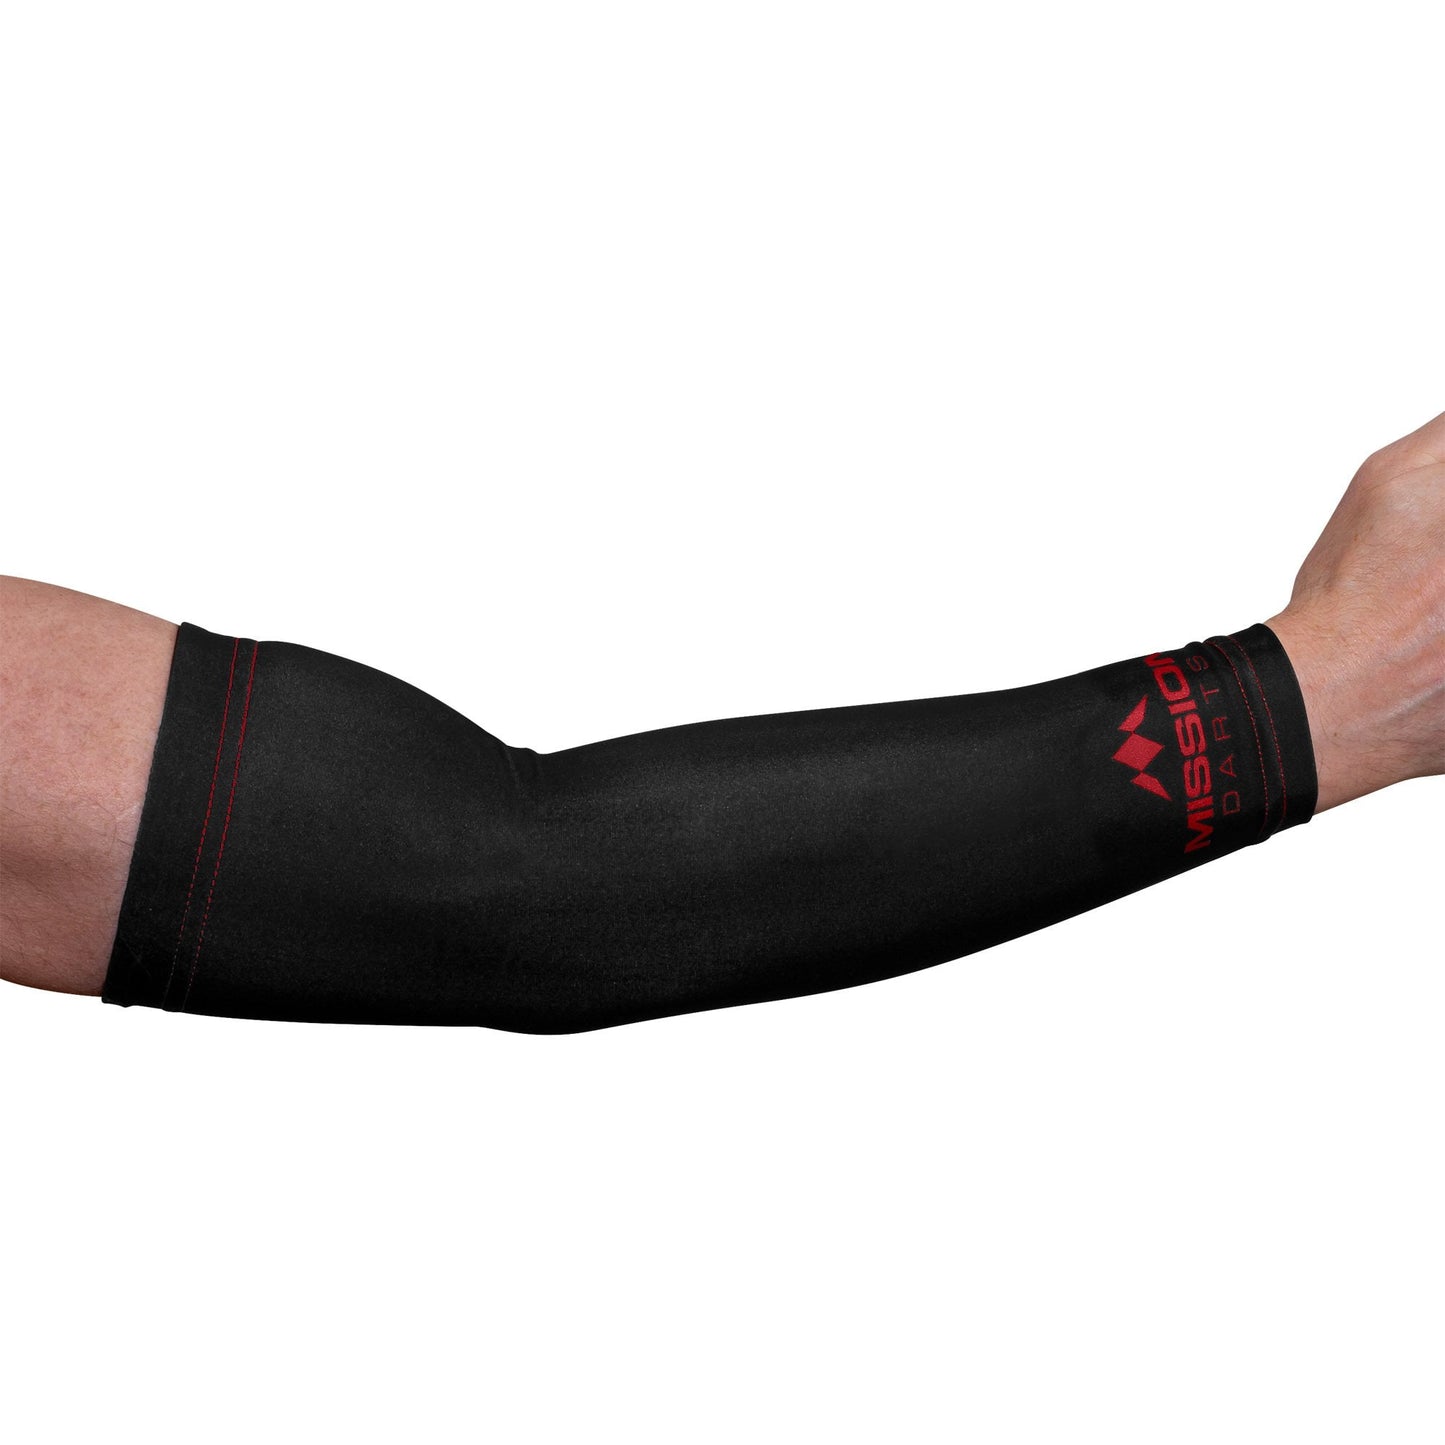 Mission Darts REACH Arm Sleeves (Pair) - Logo - Black & Red Small